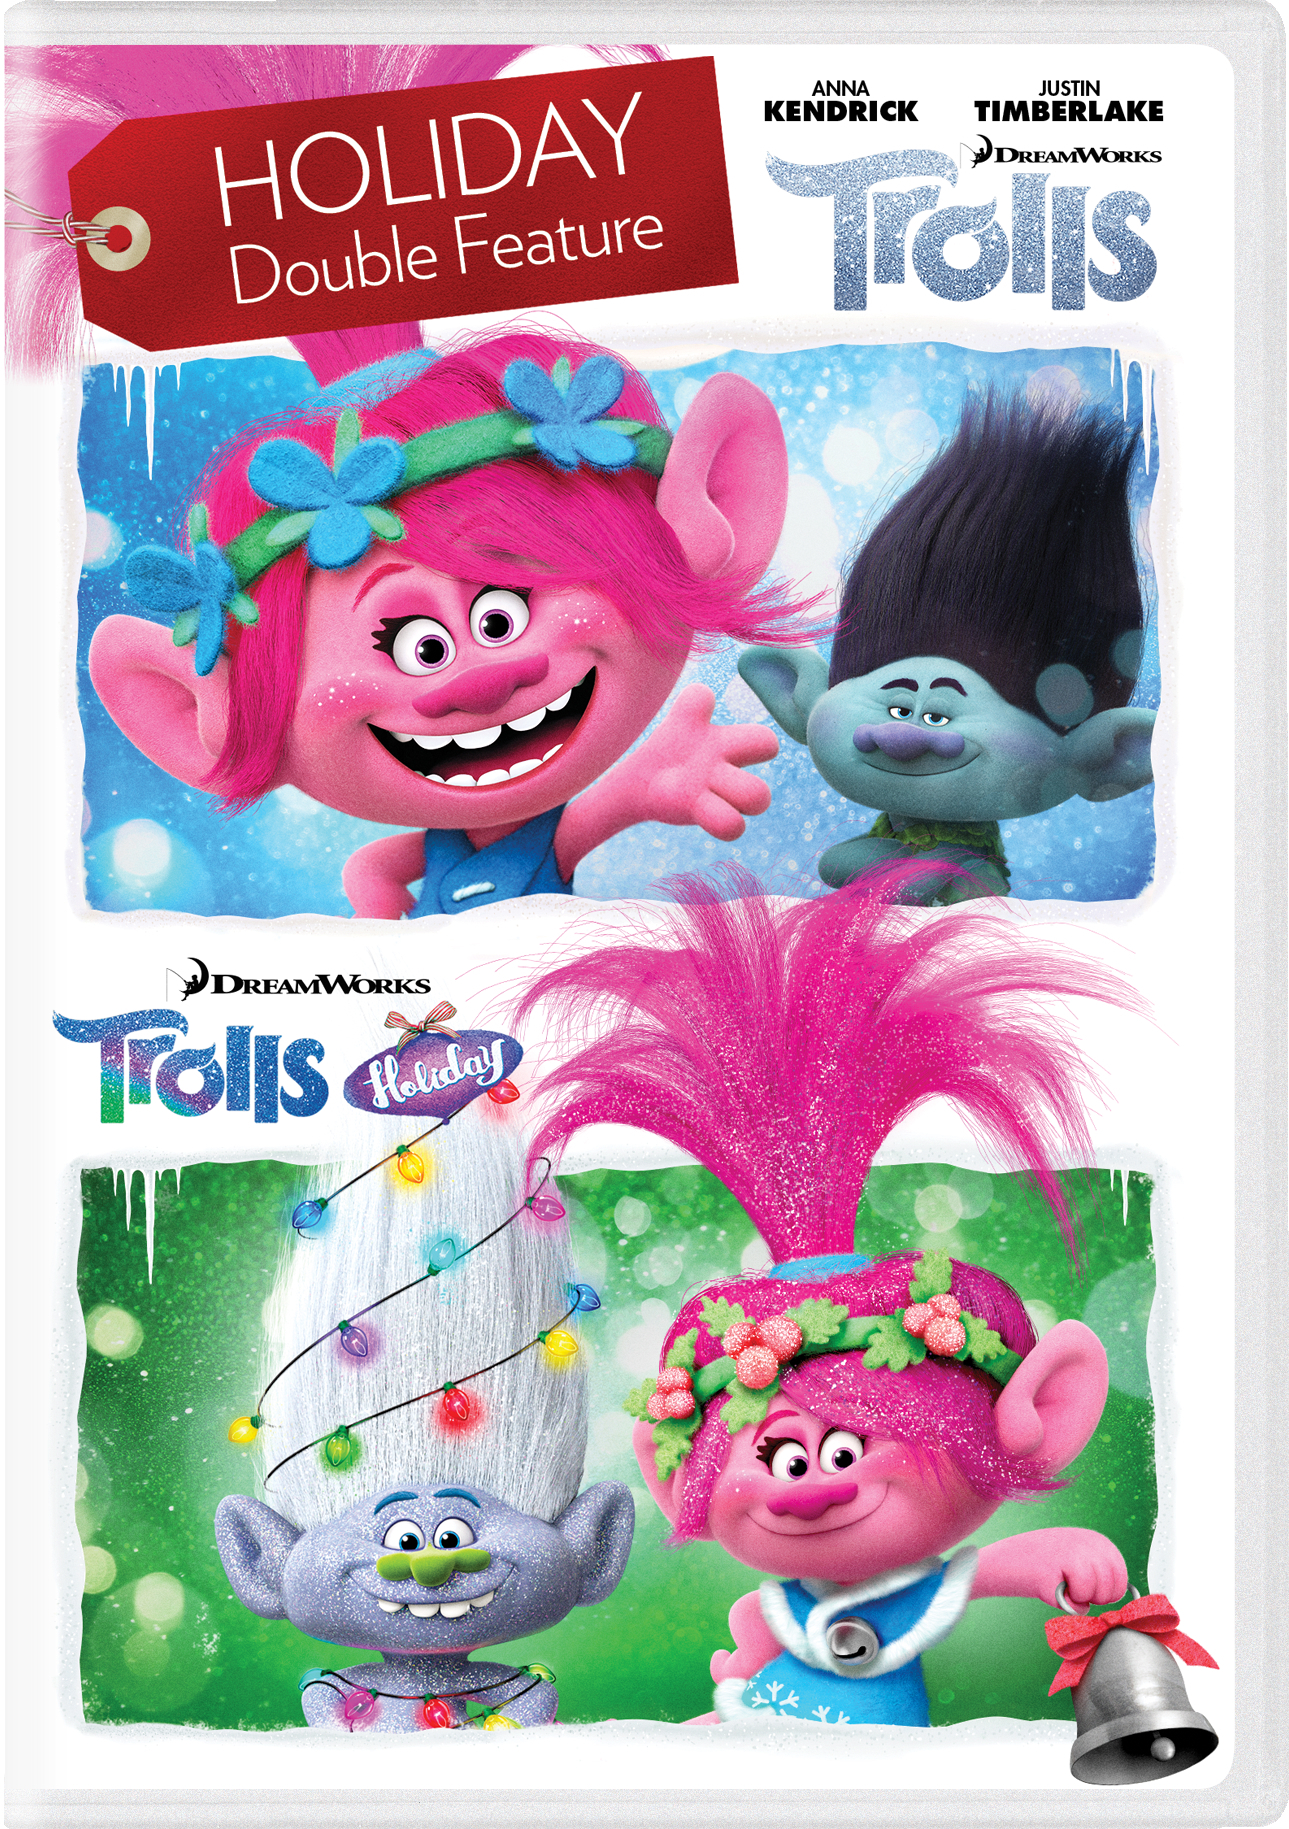 Trolls/Trolls Holiday (DVD Double Feature) - DVD [ 2017 ]  - Animation Movies On DVD - Movies On GRUV